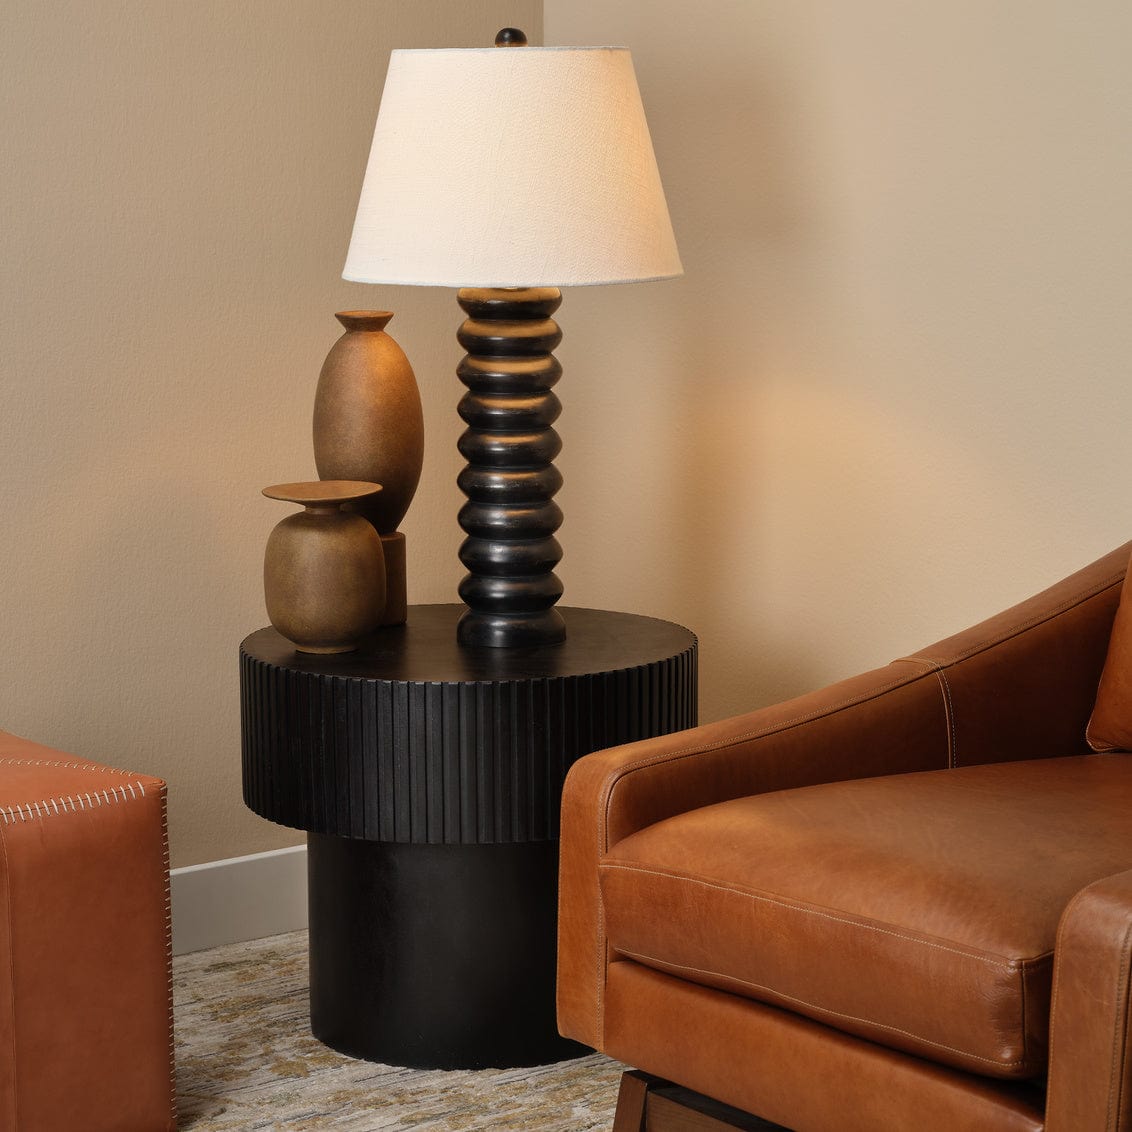 Jamie Young Co. Abacus Table Lamp Table Lamps